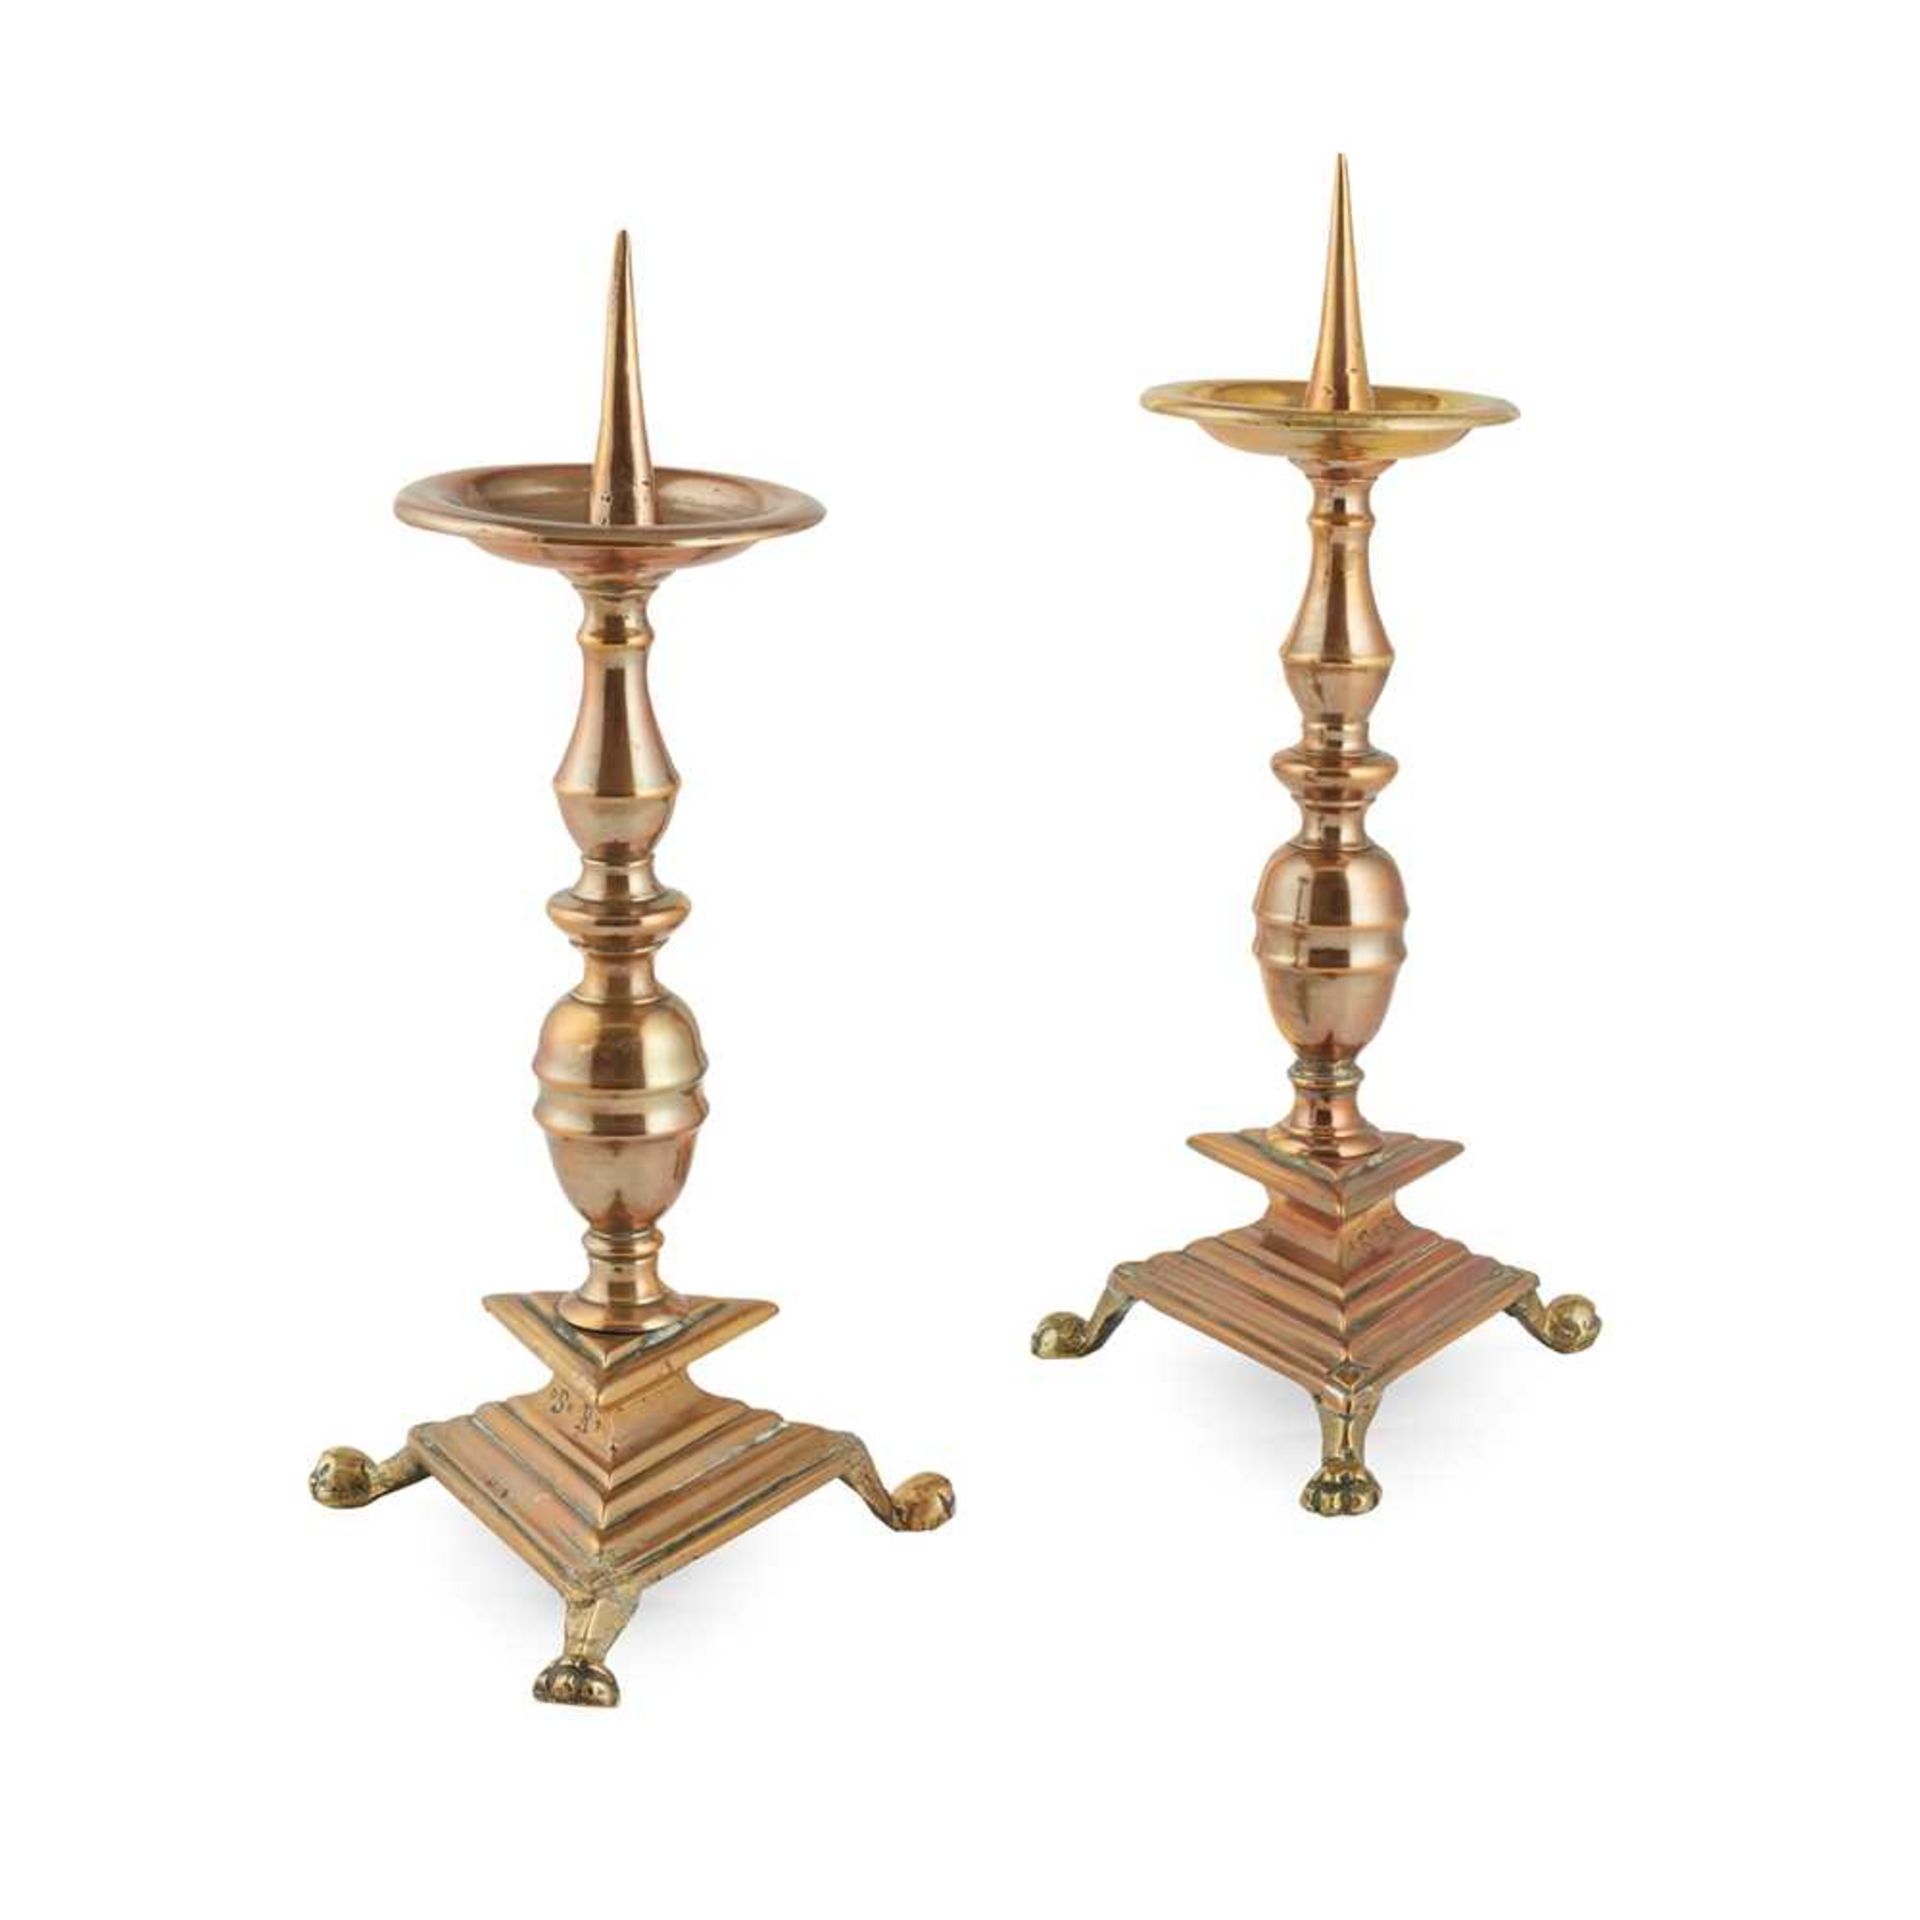 PAIR OF BRASS PRICKET CANDLESTICKS 18TH/ EARLY 19TH CENTURY